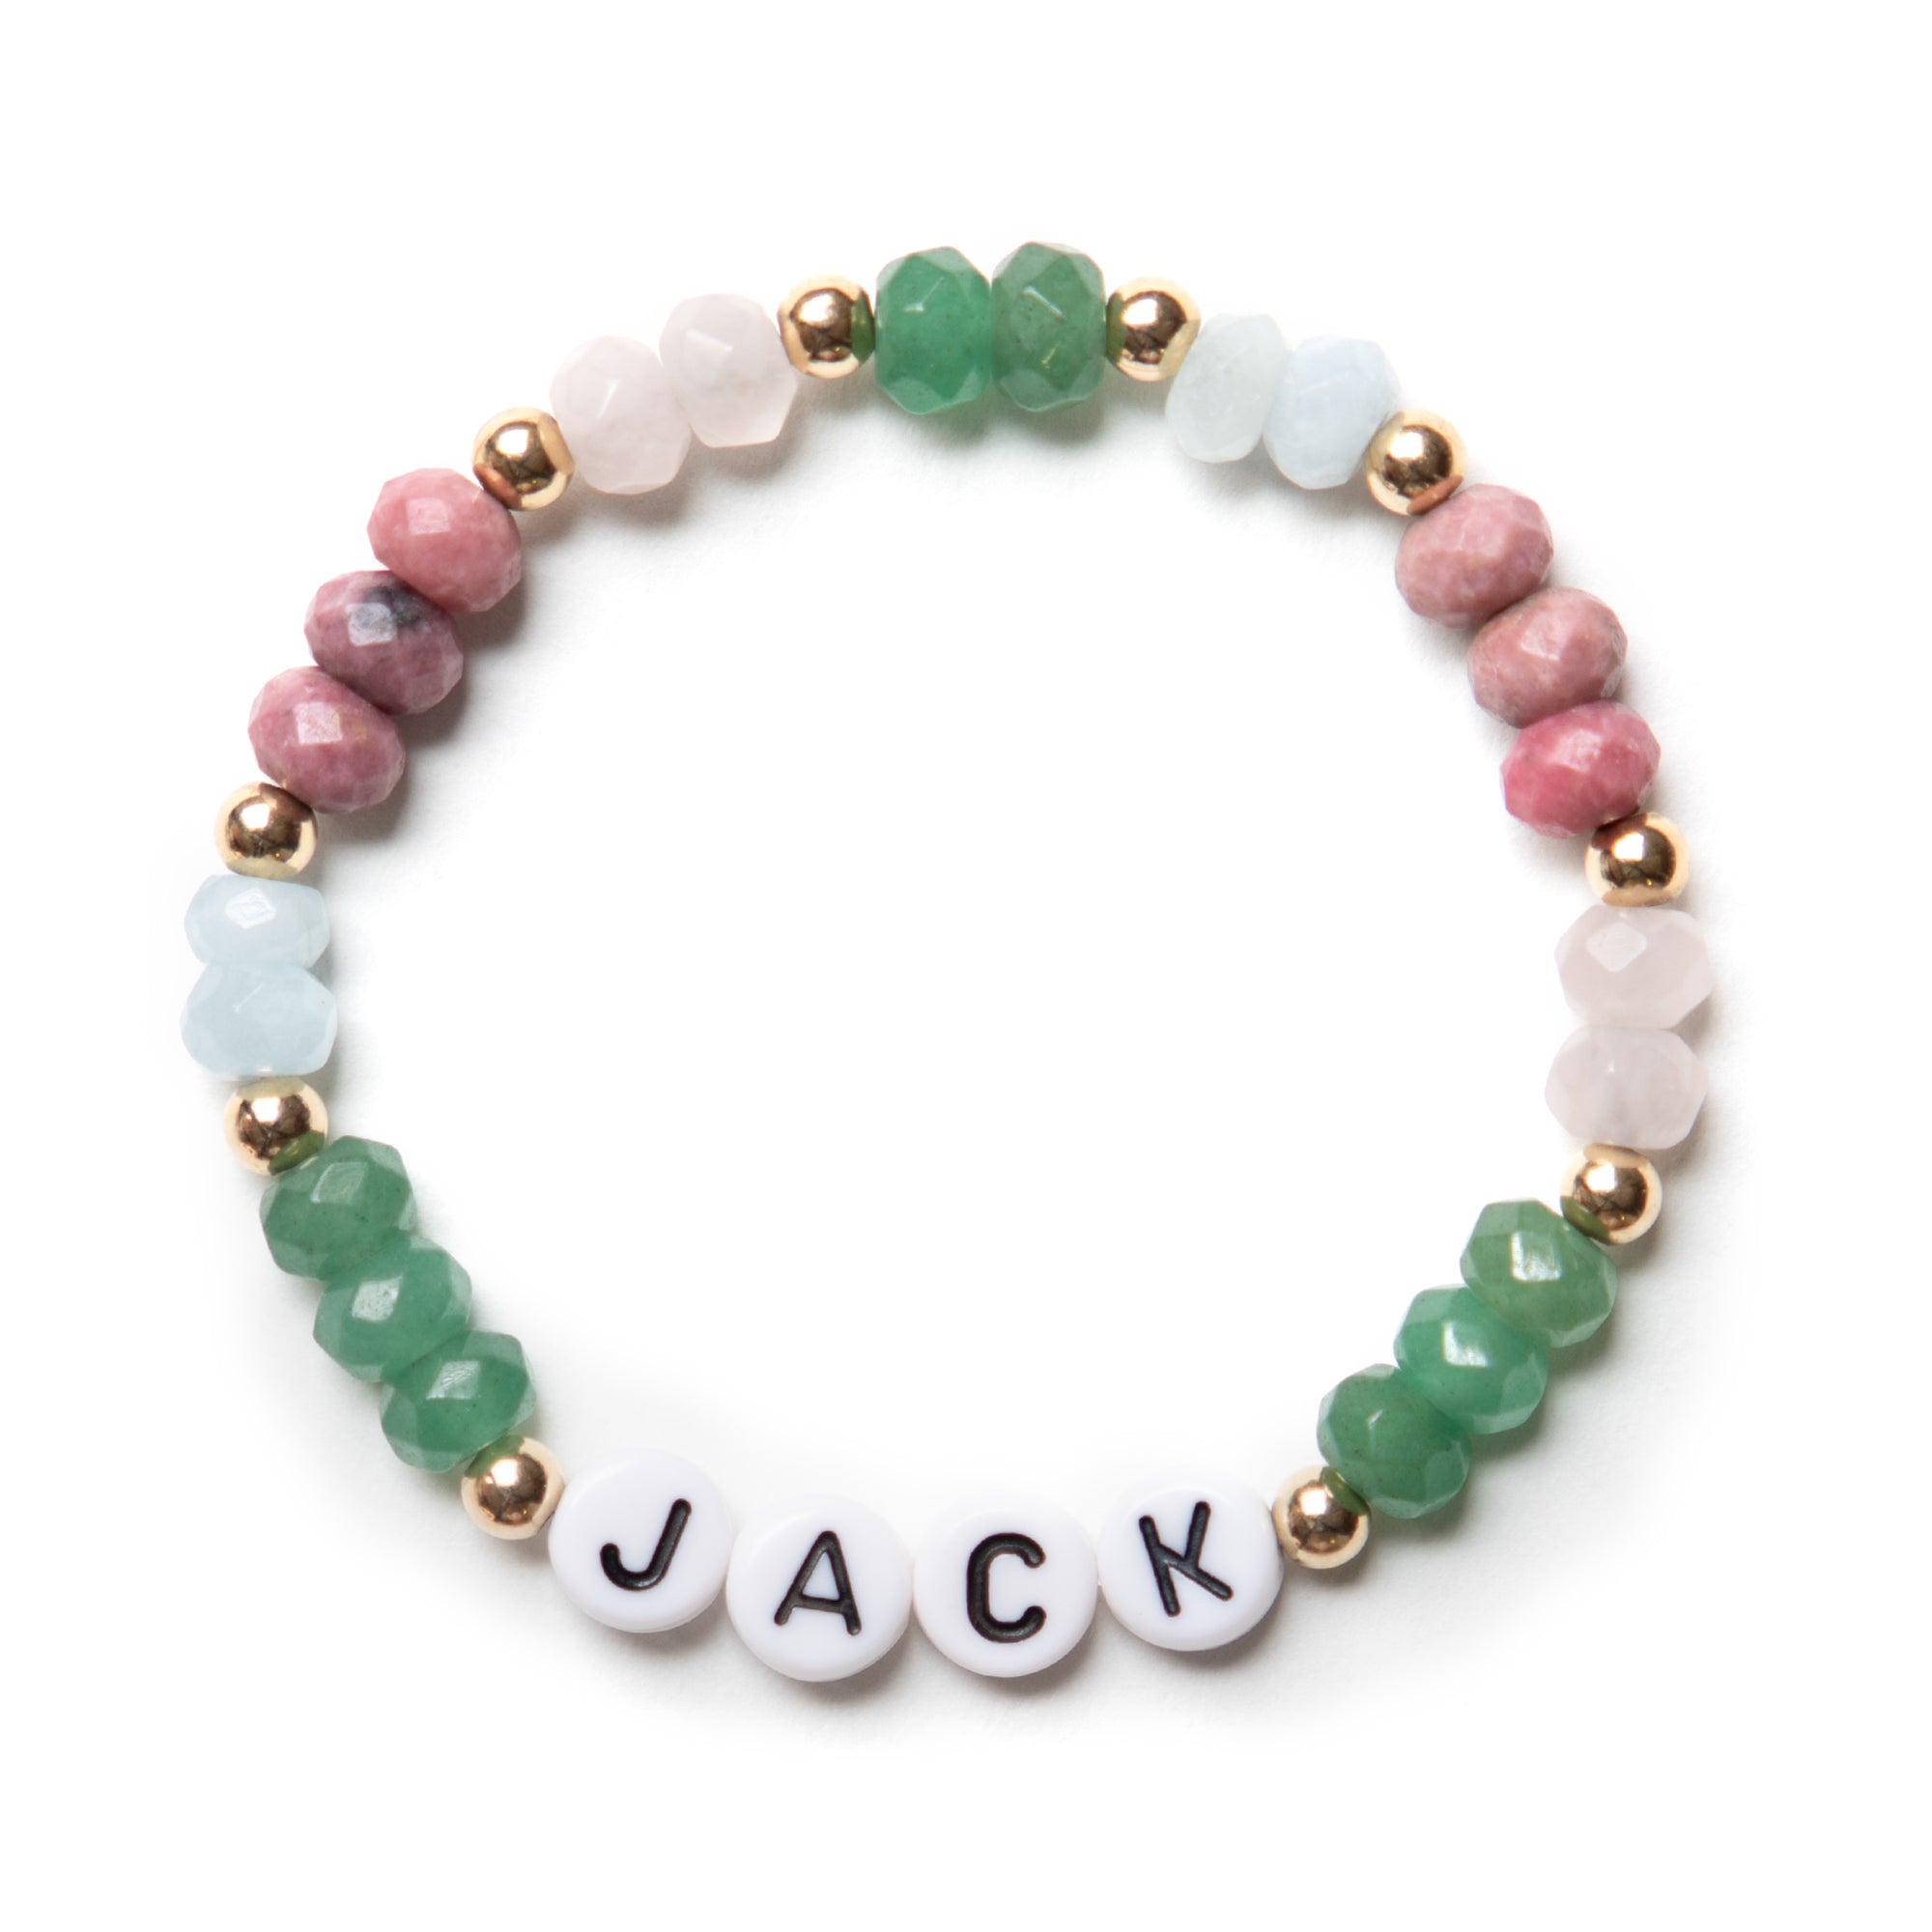 Green white and pink beaded bracelet customized with "JACK" beads